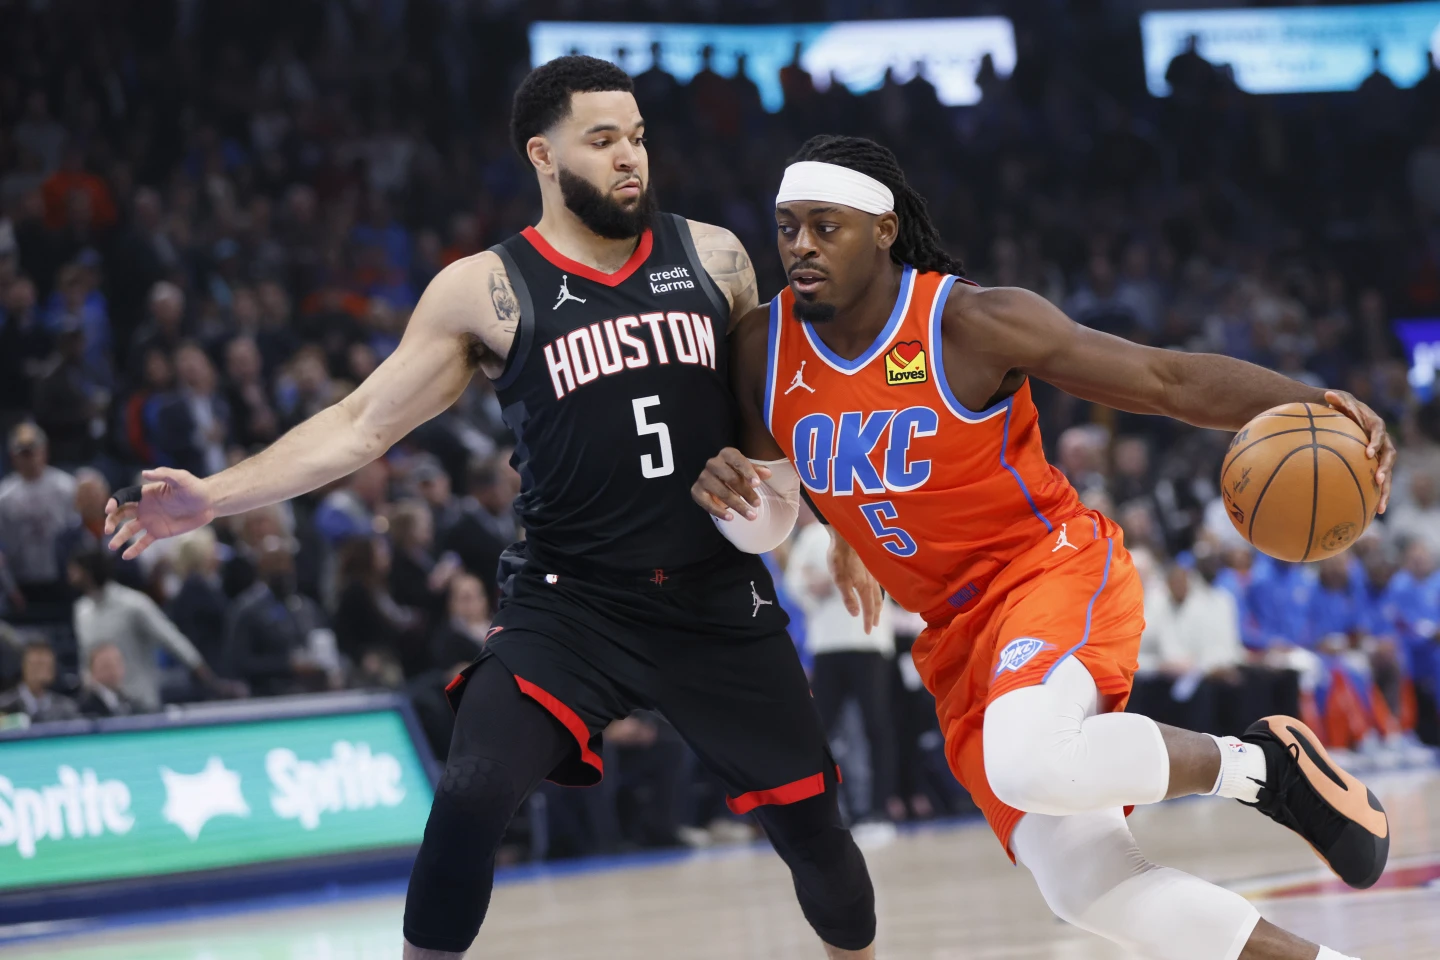 Jalen Green racks up 37 points as Houston Rockets edge past Oklahoma City Thunder 132-126 in overtime for their 10th consecutive win